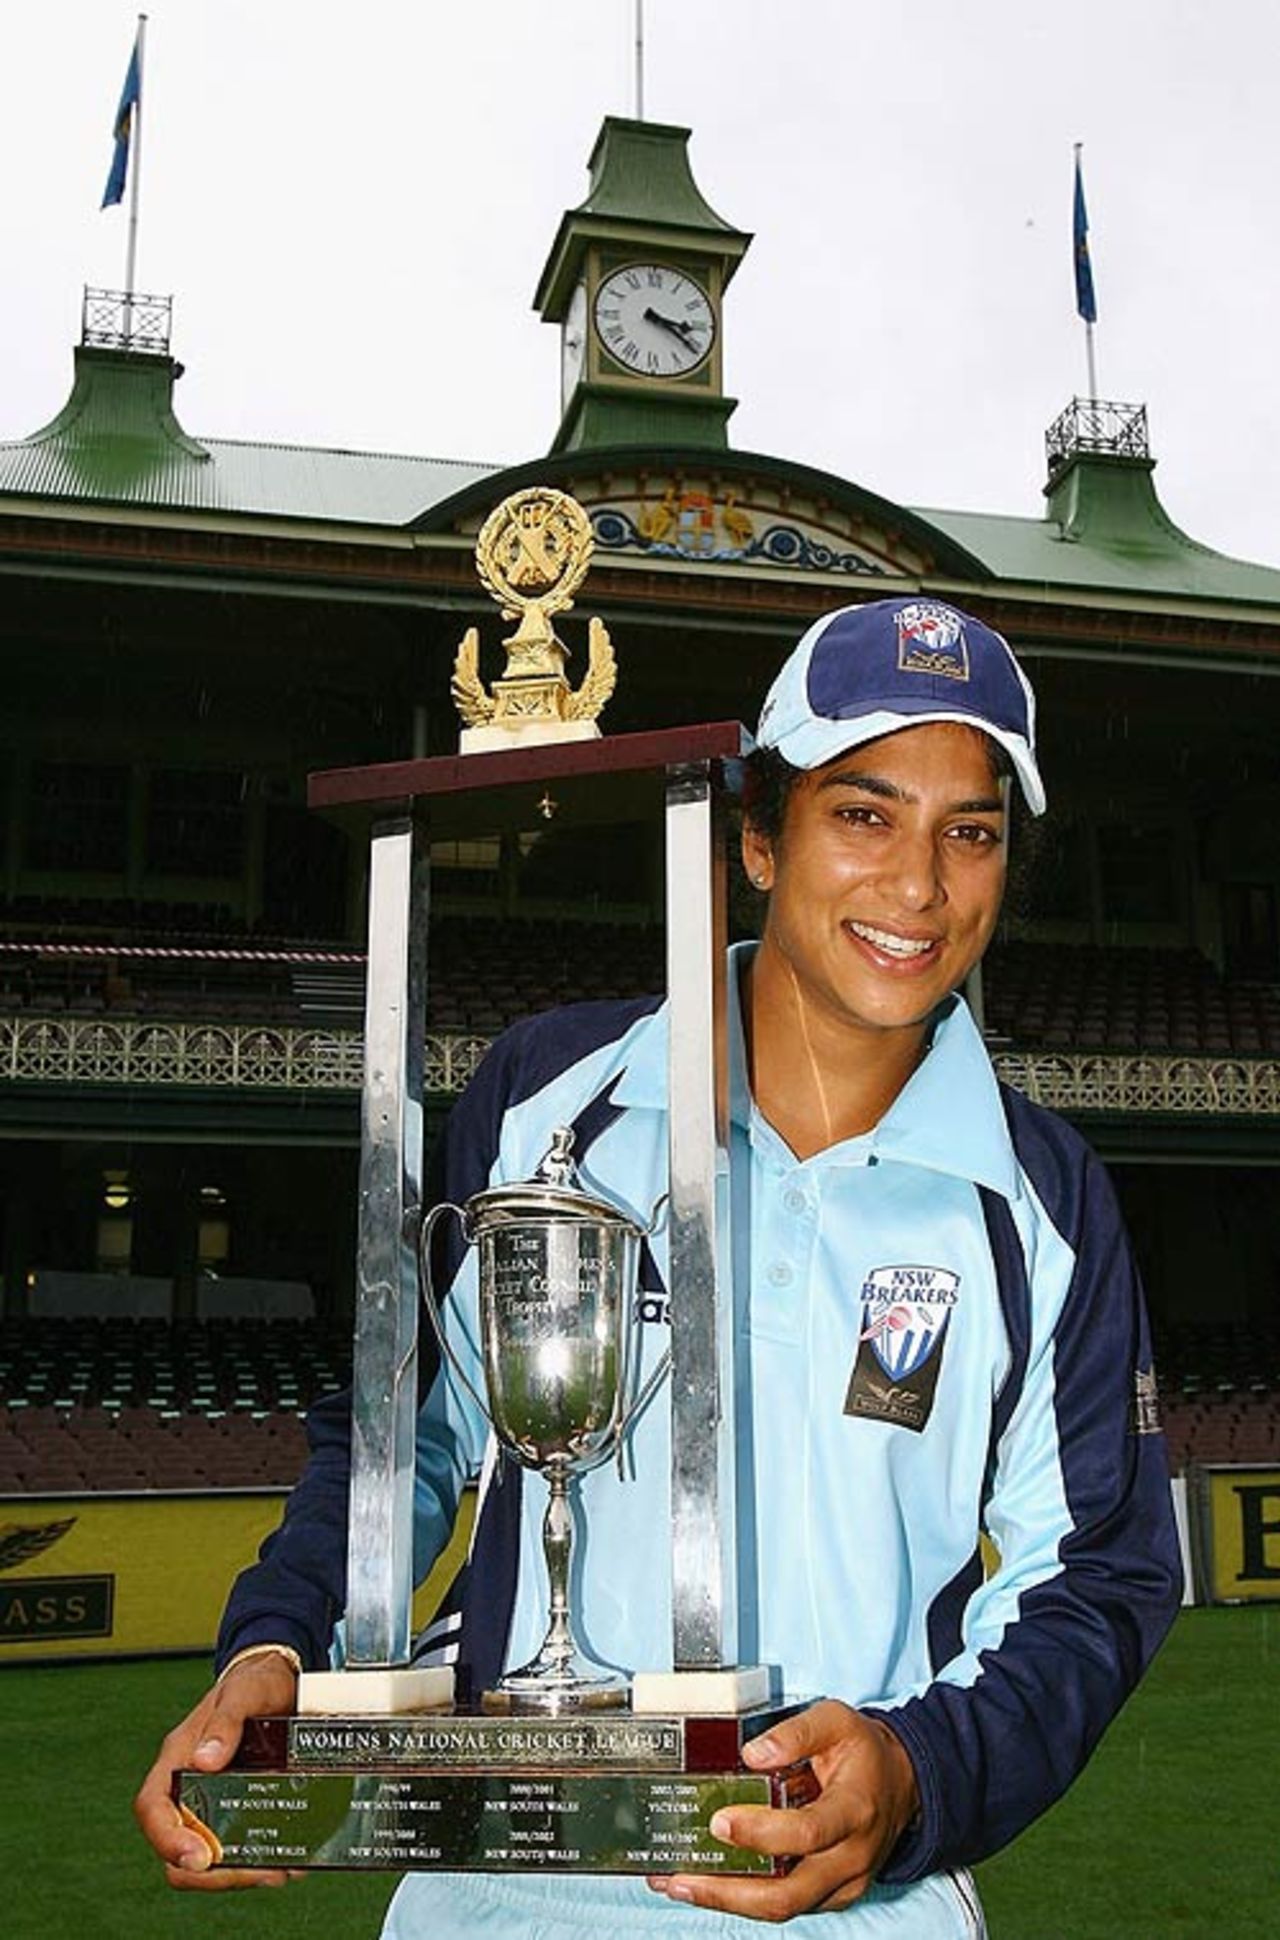 The New South Wales captain Lisa Sthalekar with the trophy, New South Wales v South Australia, Women's National Cricket League final, Sydney, January 19, 2008